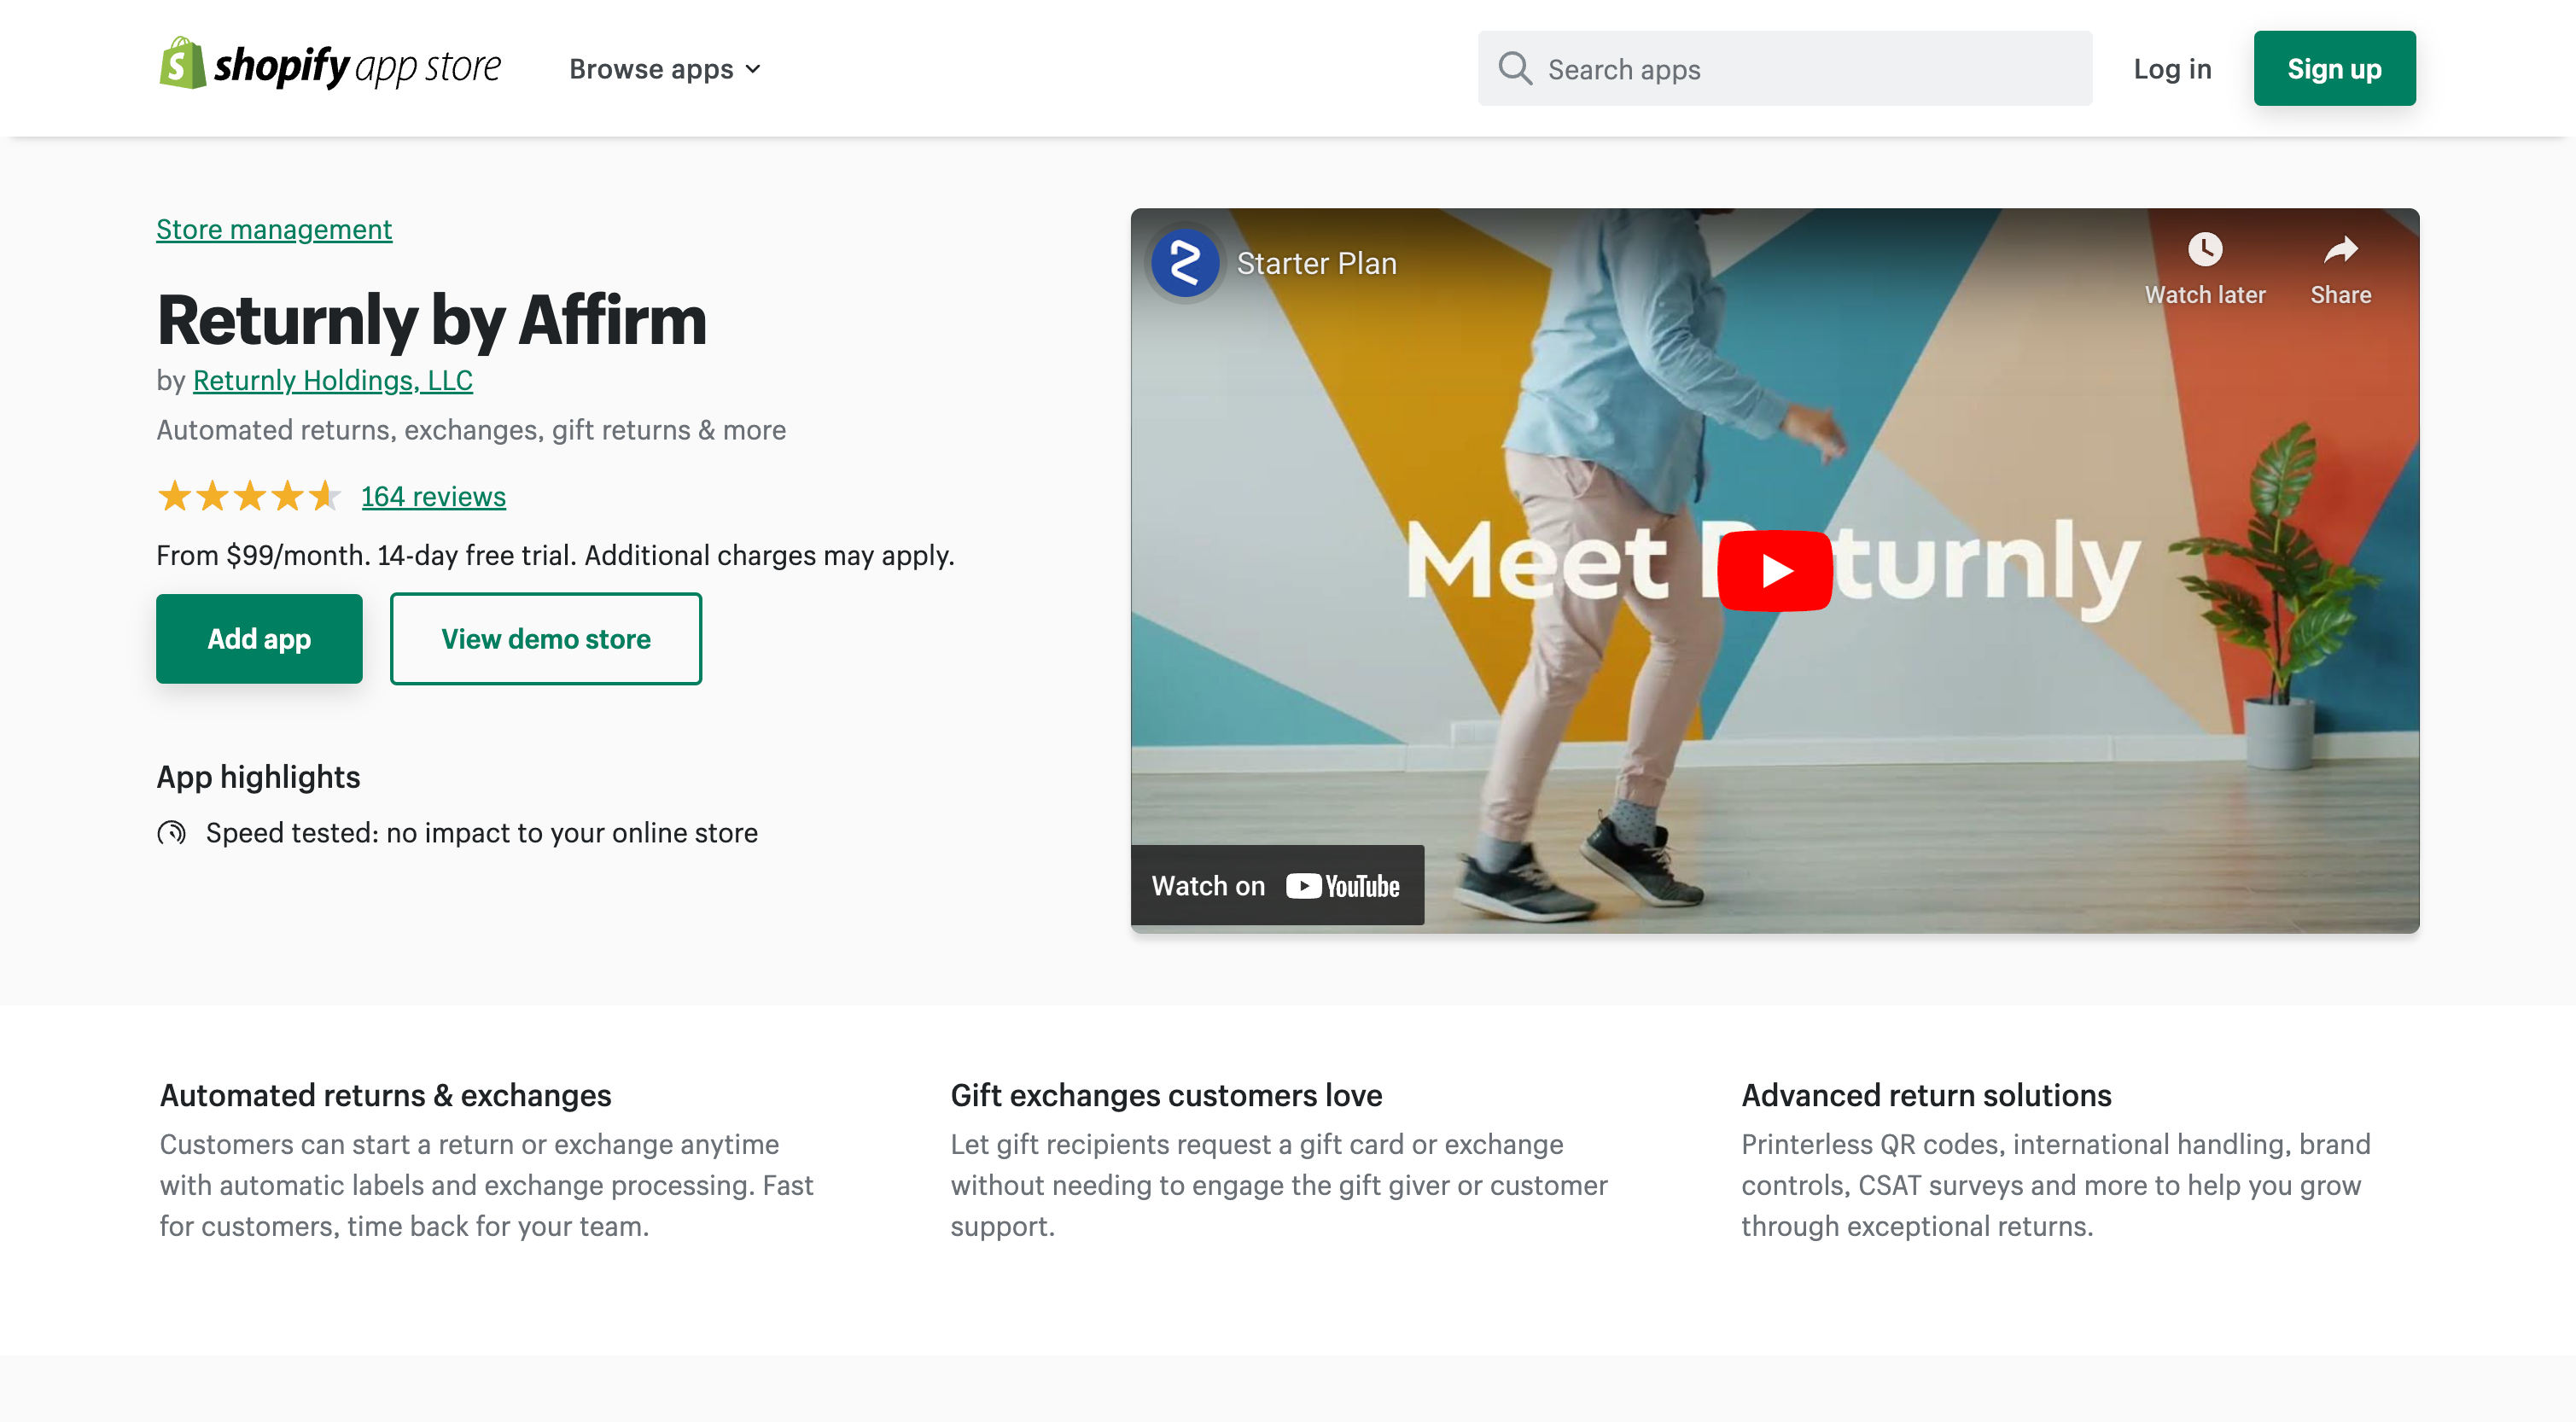 Returnly by Affirm - Automated returns, exchanges, gift returns & more